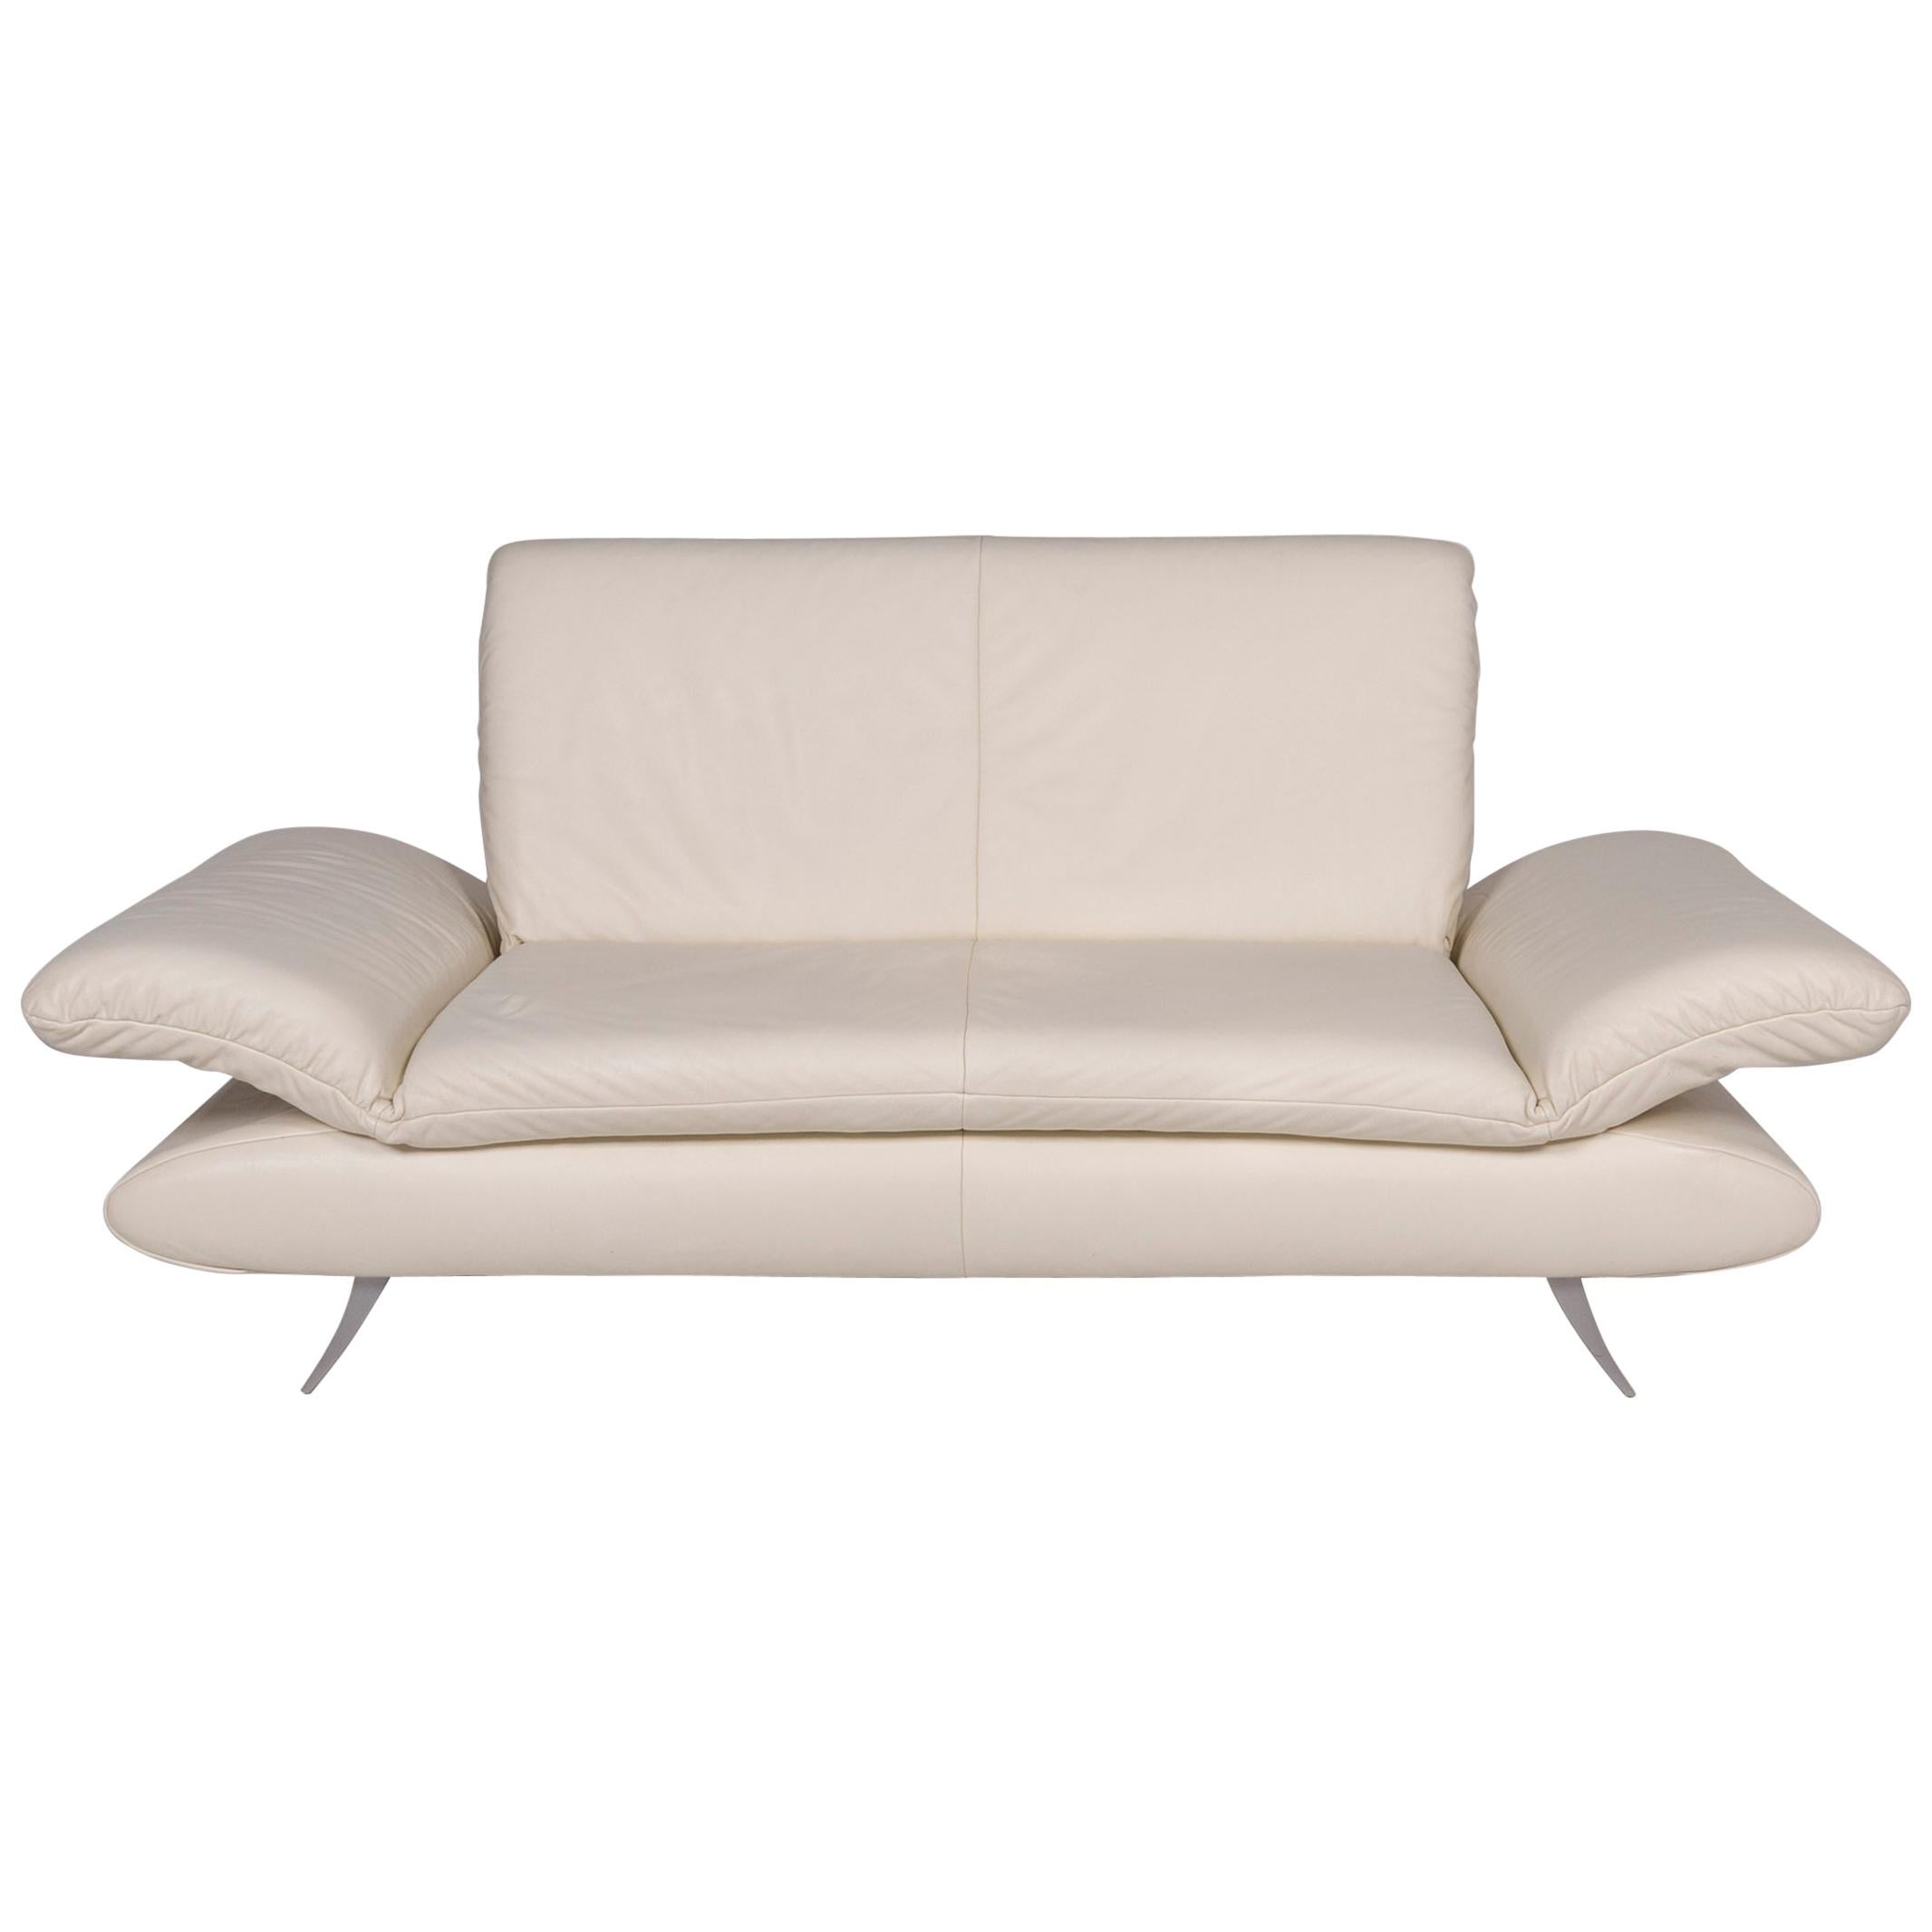 Koinor Rossini Leather Cream Sofa Two-Seat Function Couch For Sale